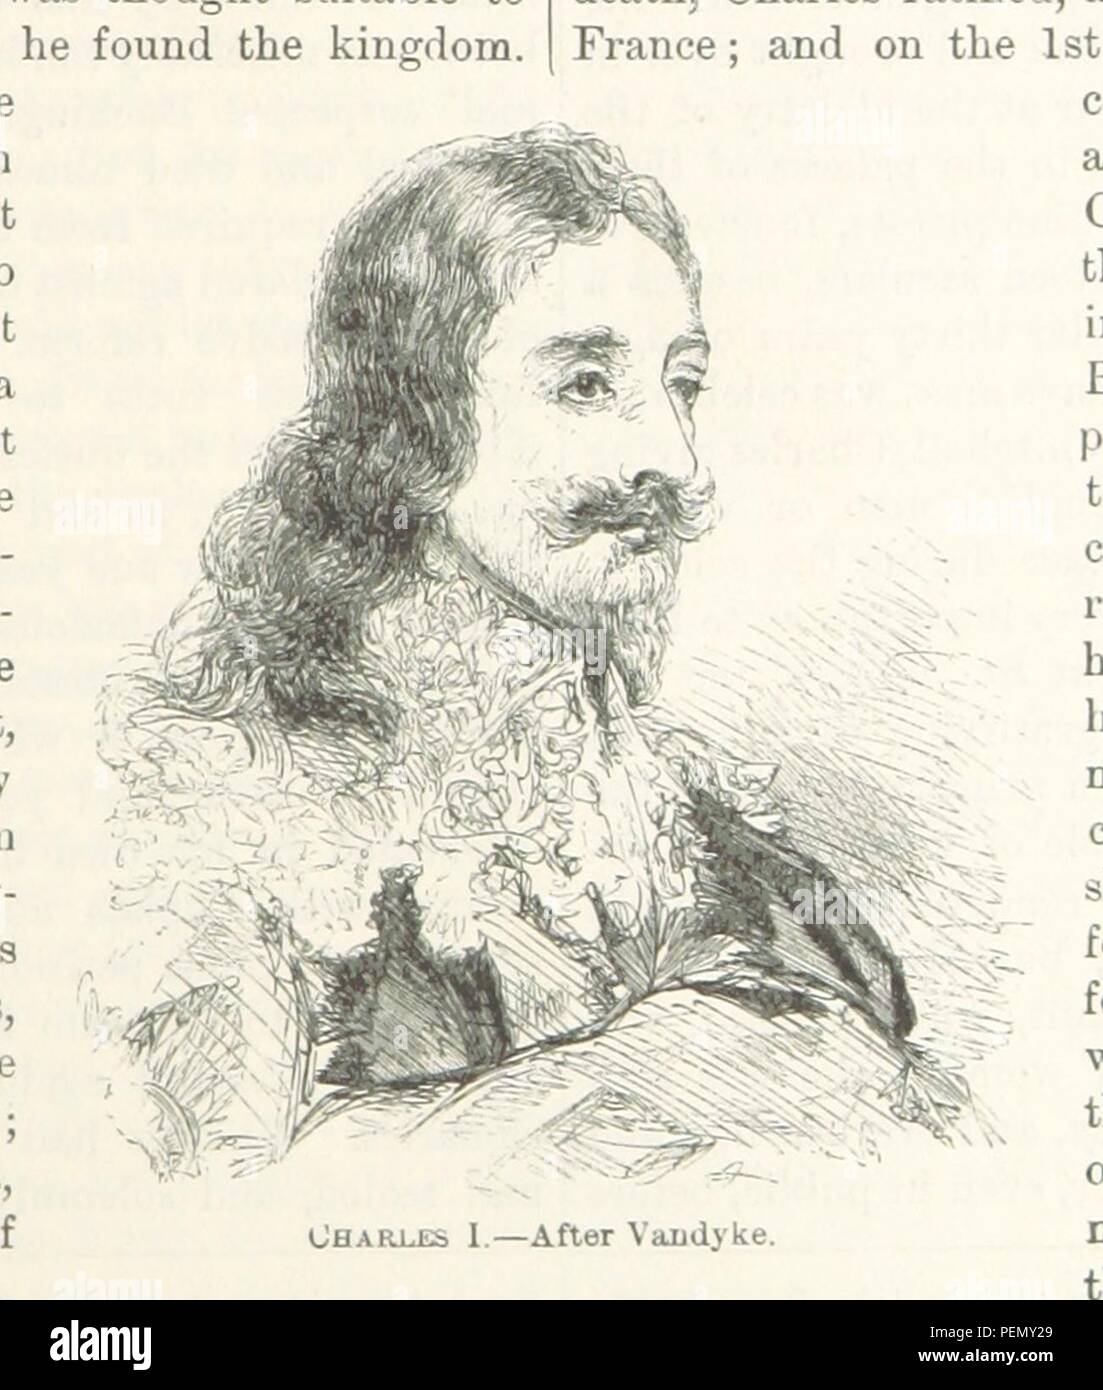 page 401 of '[The Comprehensive History of England, civil, military, religious, intellectual, and social, from the earliest period to the suppression of the Sepoy Revolt. ... Revised and edited by T. Thomson.]' by 3273. Stock Photo